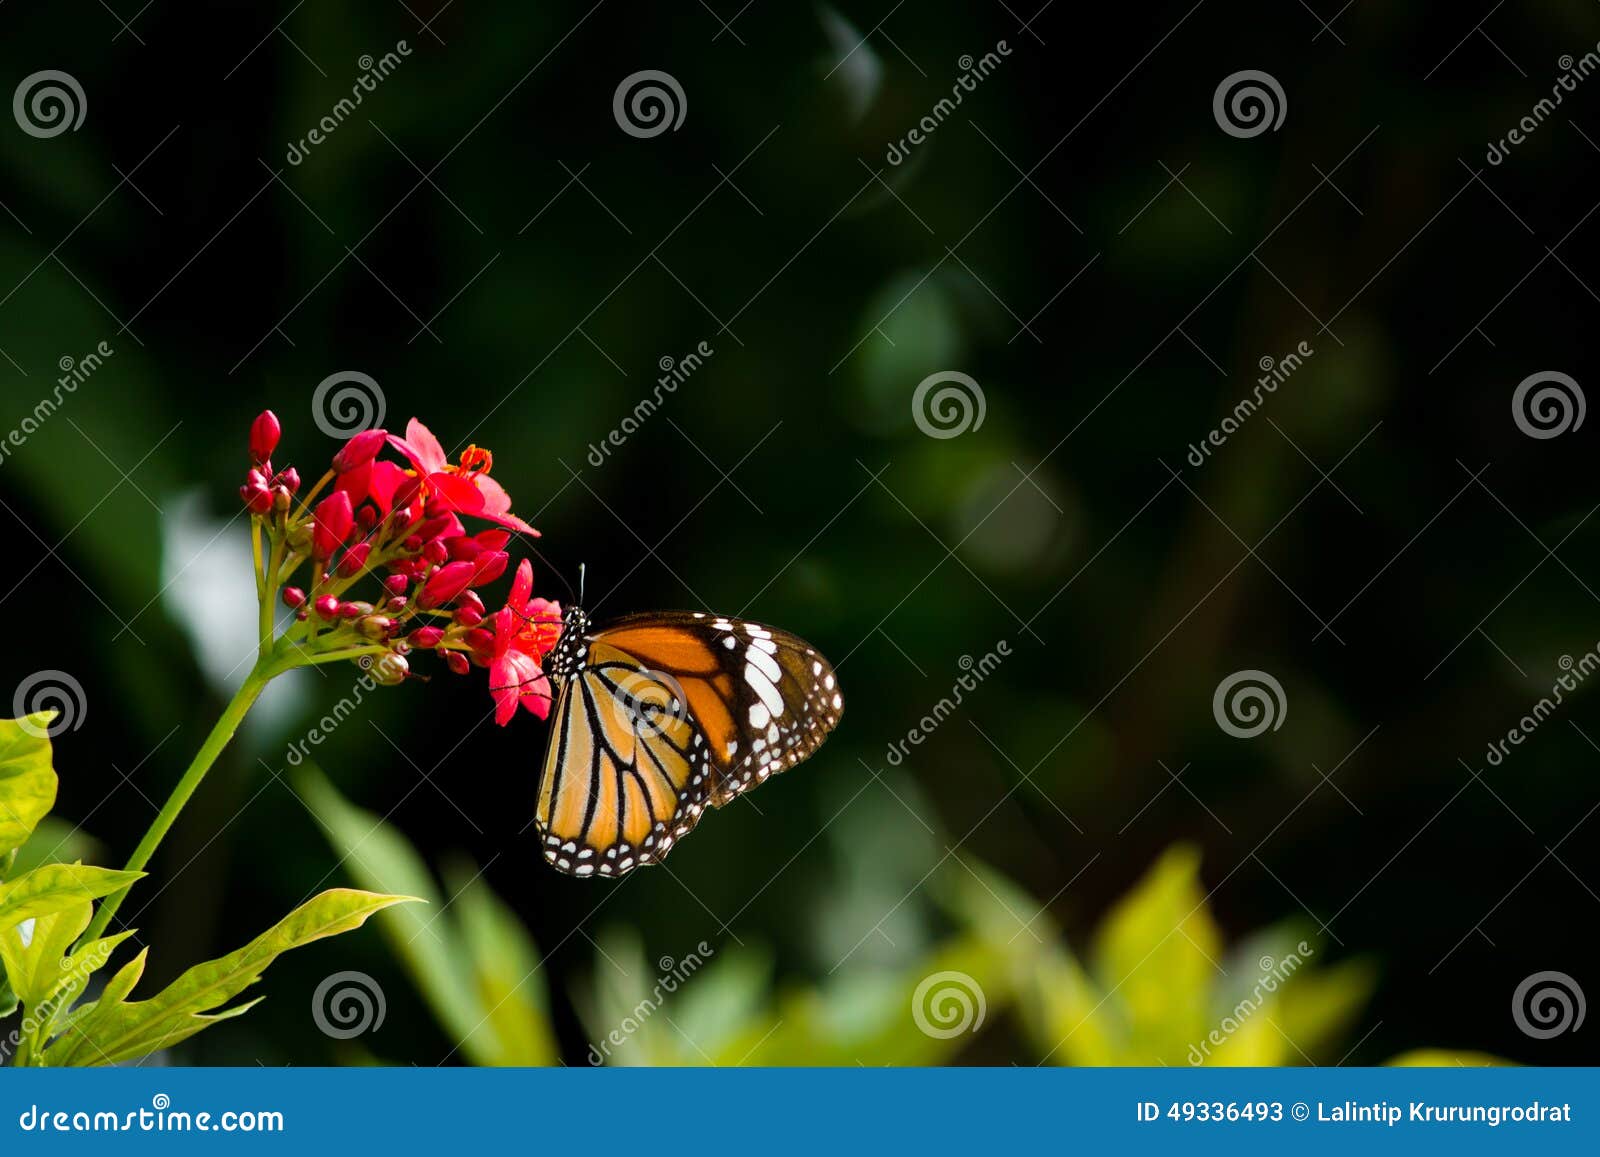 Butterfly and flower. One butterfly and pind flower